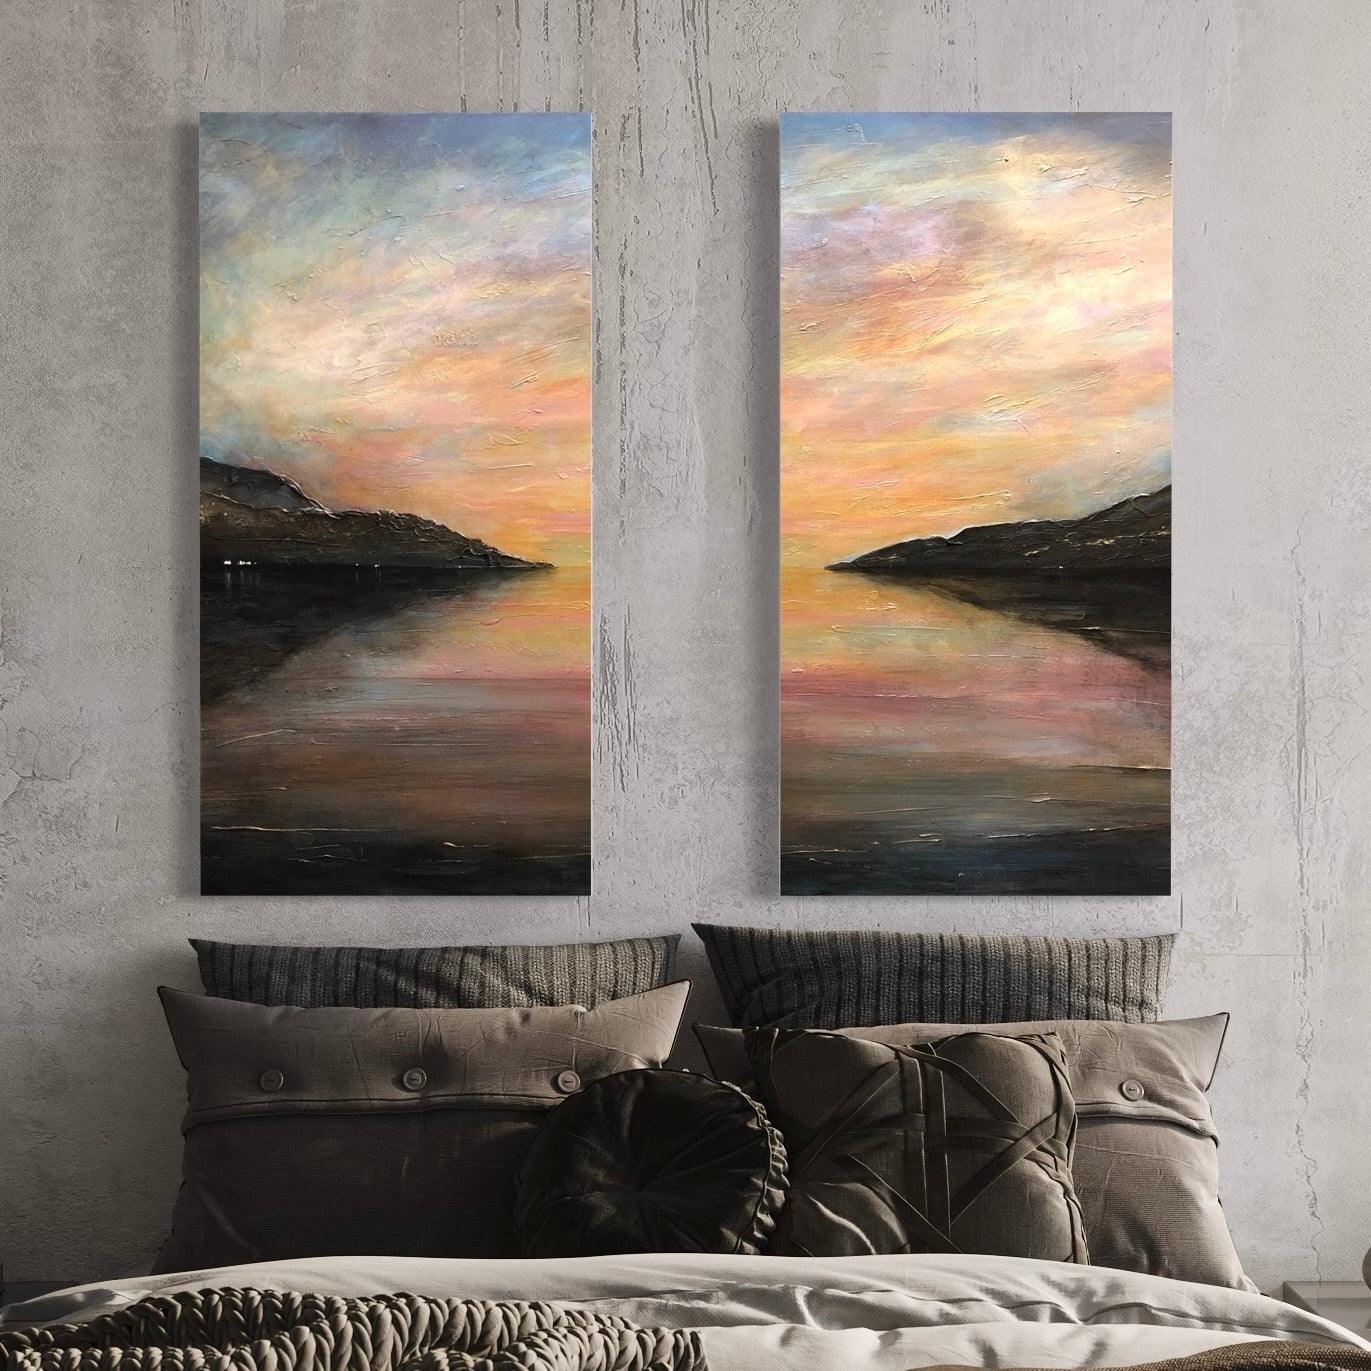 Loch Ness Glow Painting Signed Fine Art Diptych Canvas-Statement Wall Art-Scottish Lochs & Mountains Art Gallery-Paintings, Prints, Homeware, Art Gifts From Scotland By Scottish Artist Kevin Hunter